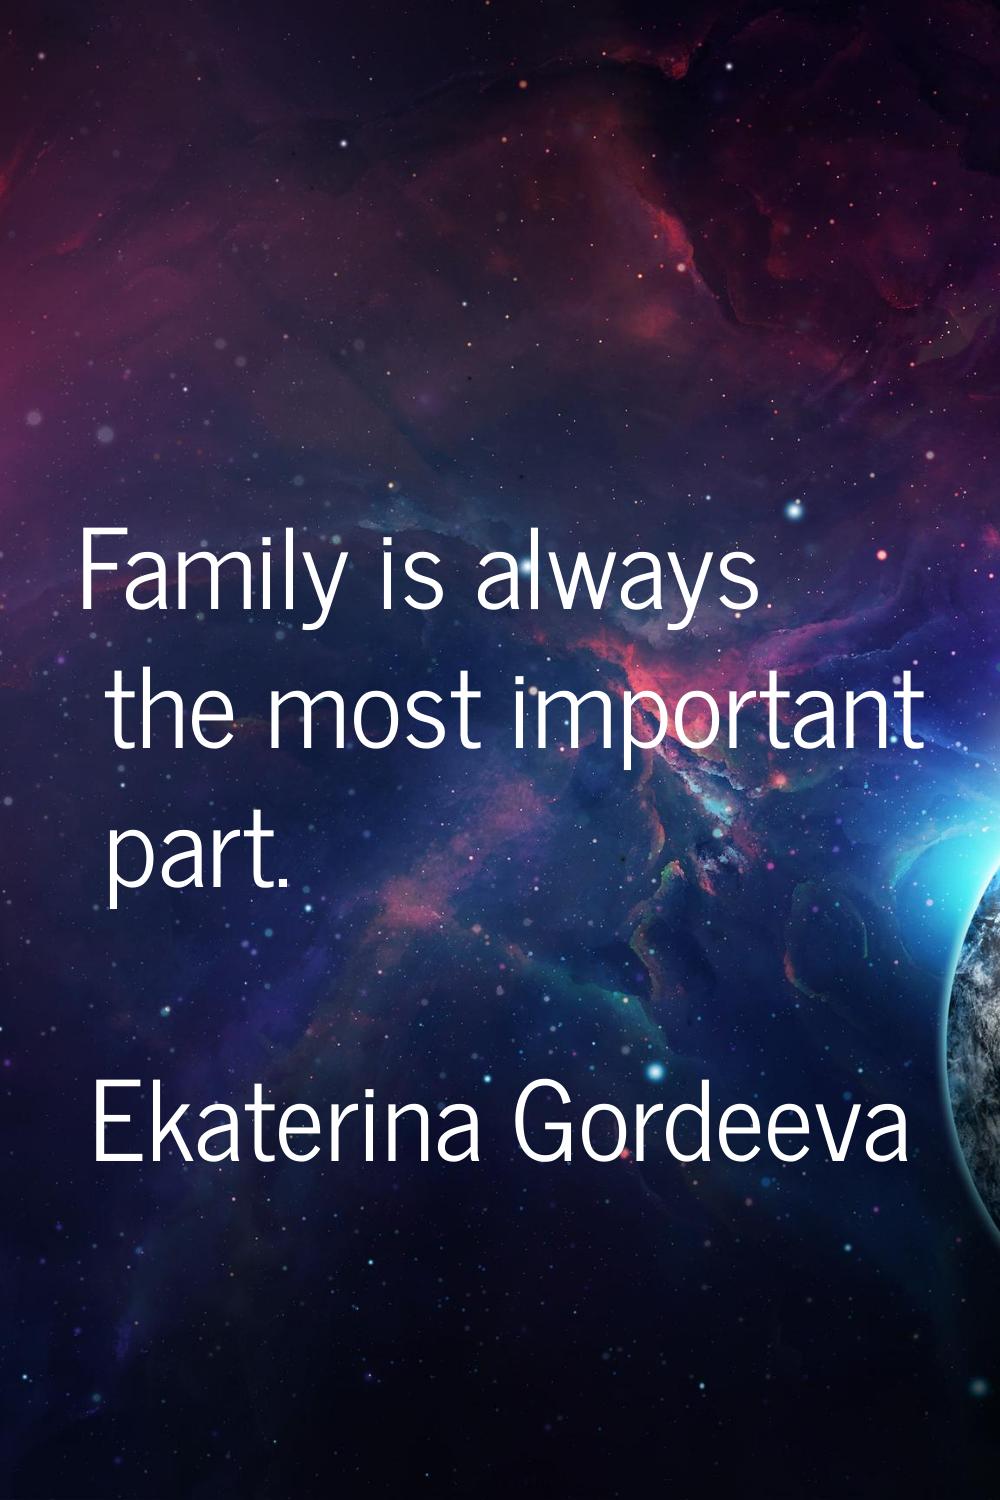 Family is always the most important part.